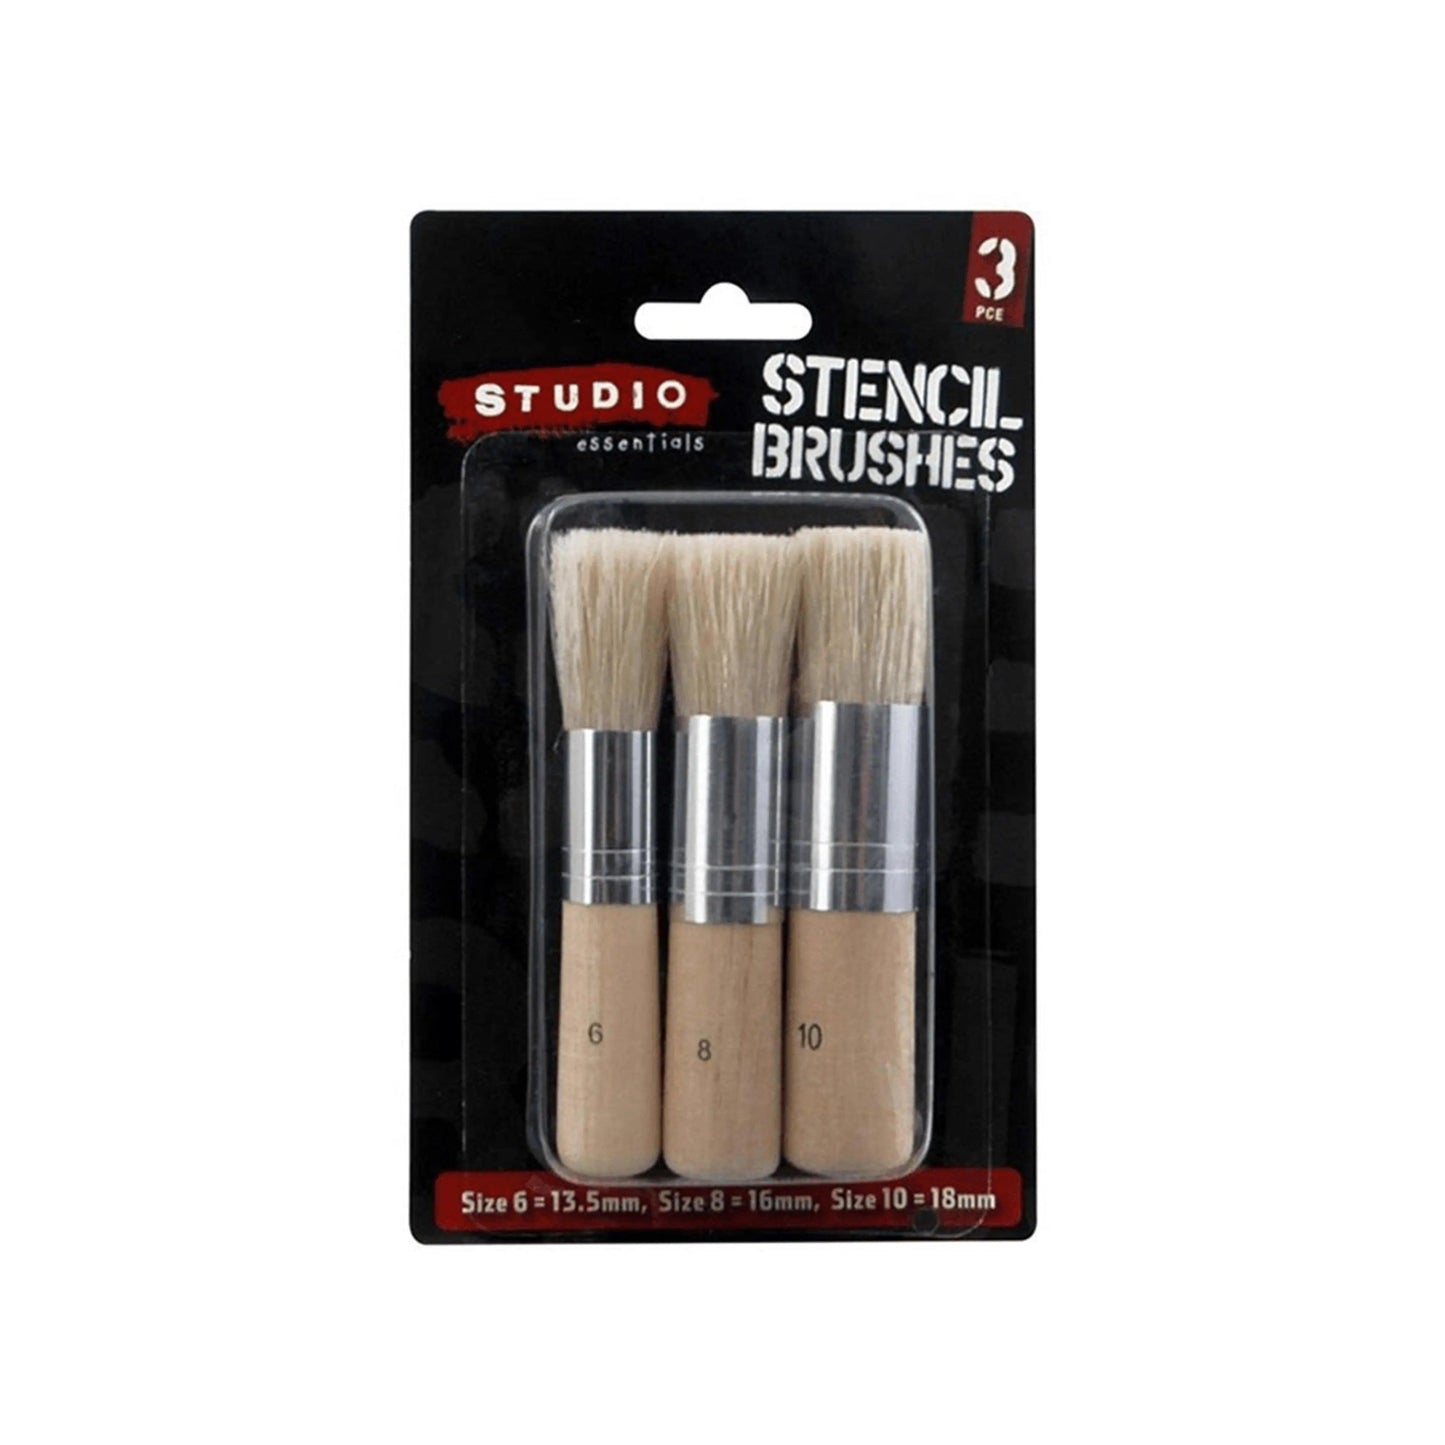 Keep Smiling Stencil Brushes Set Pack of 3 The Stationers